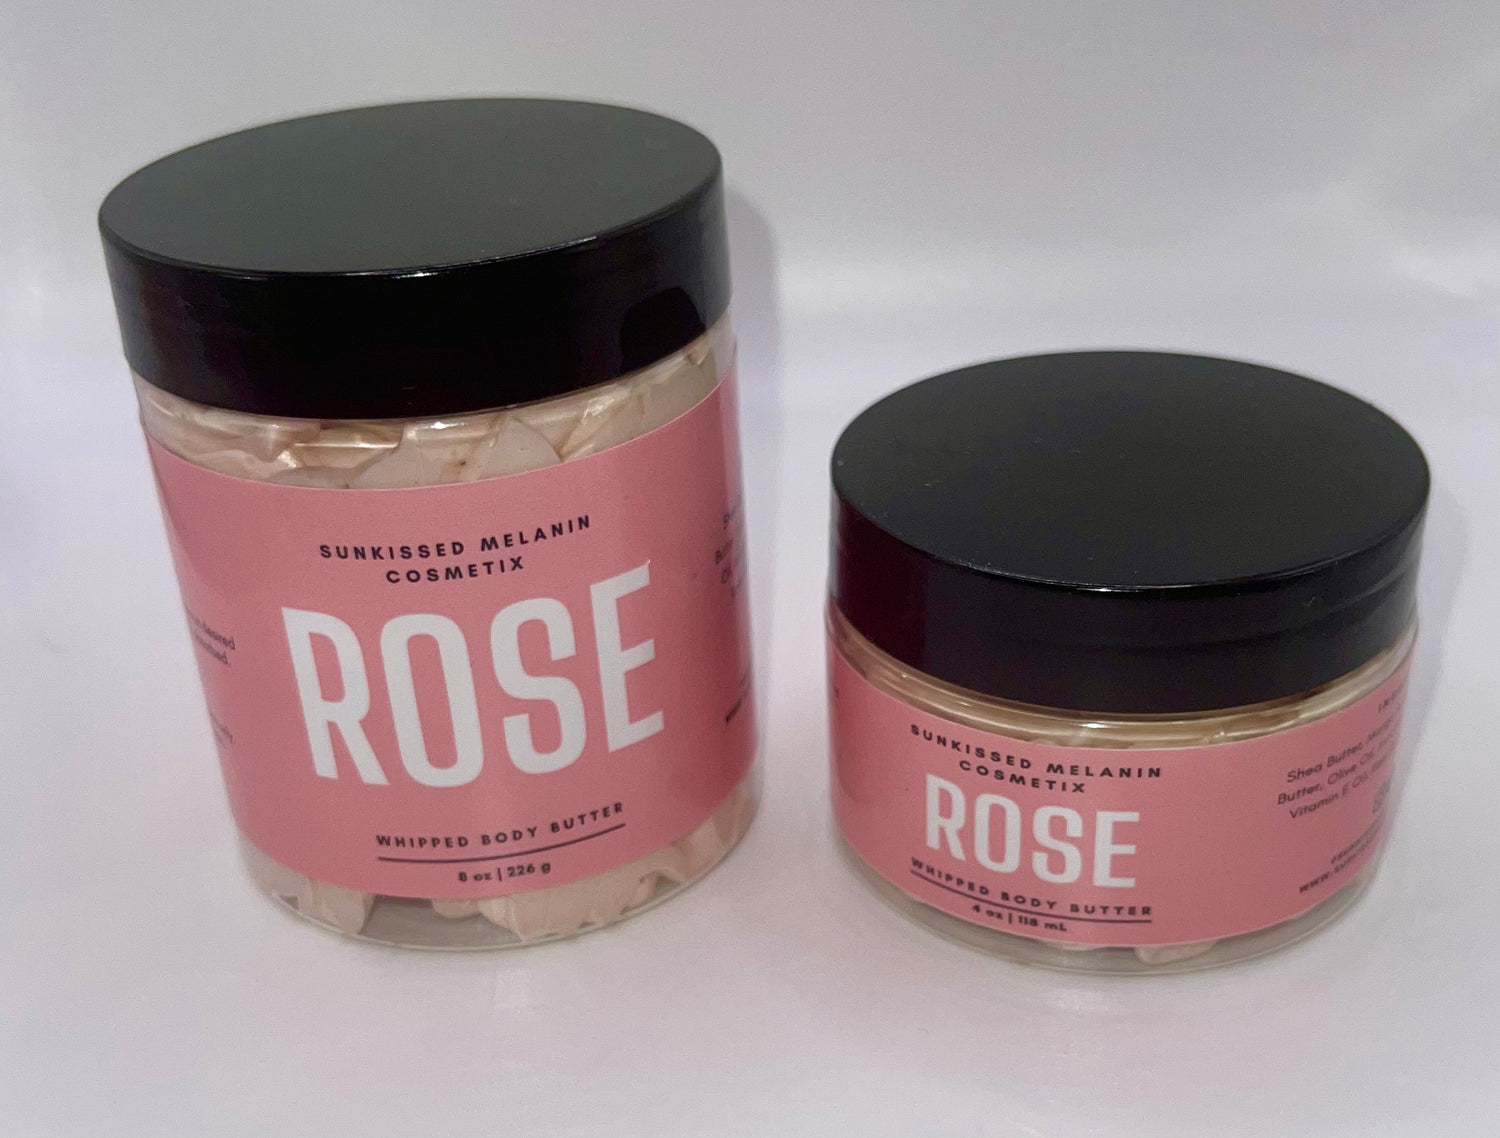 Sunkissed Melanin Rose Collection